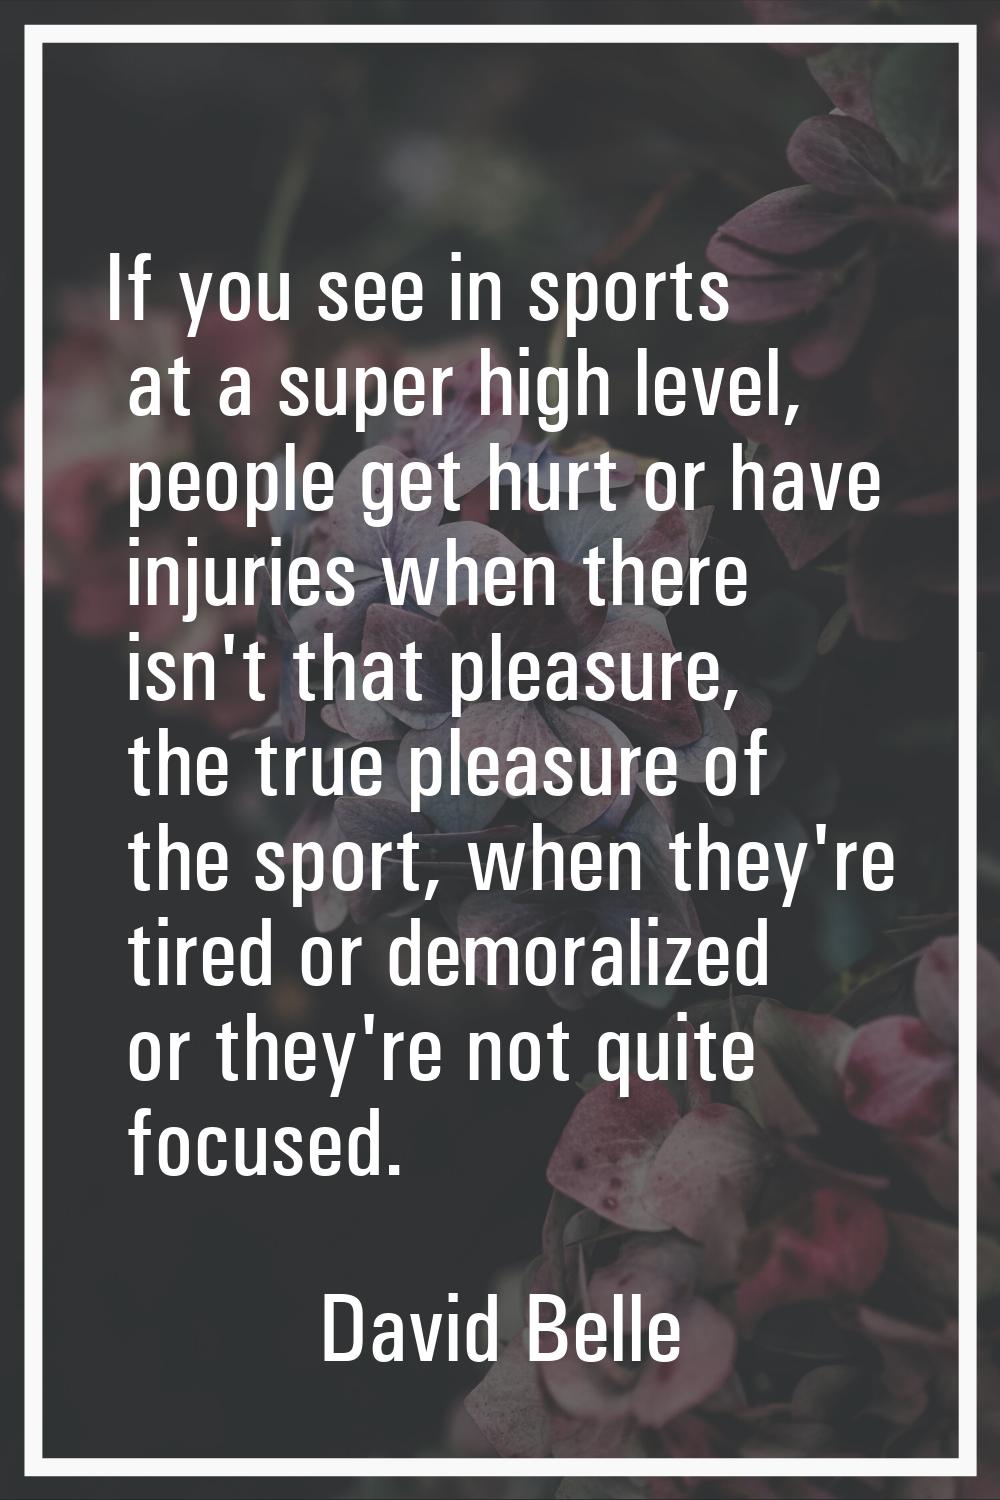 If you see in sports at a super high level, people get hurt or have injuries when there isn't that 